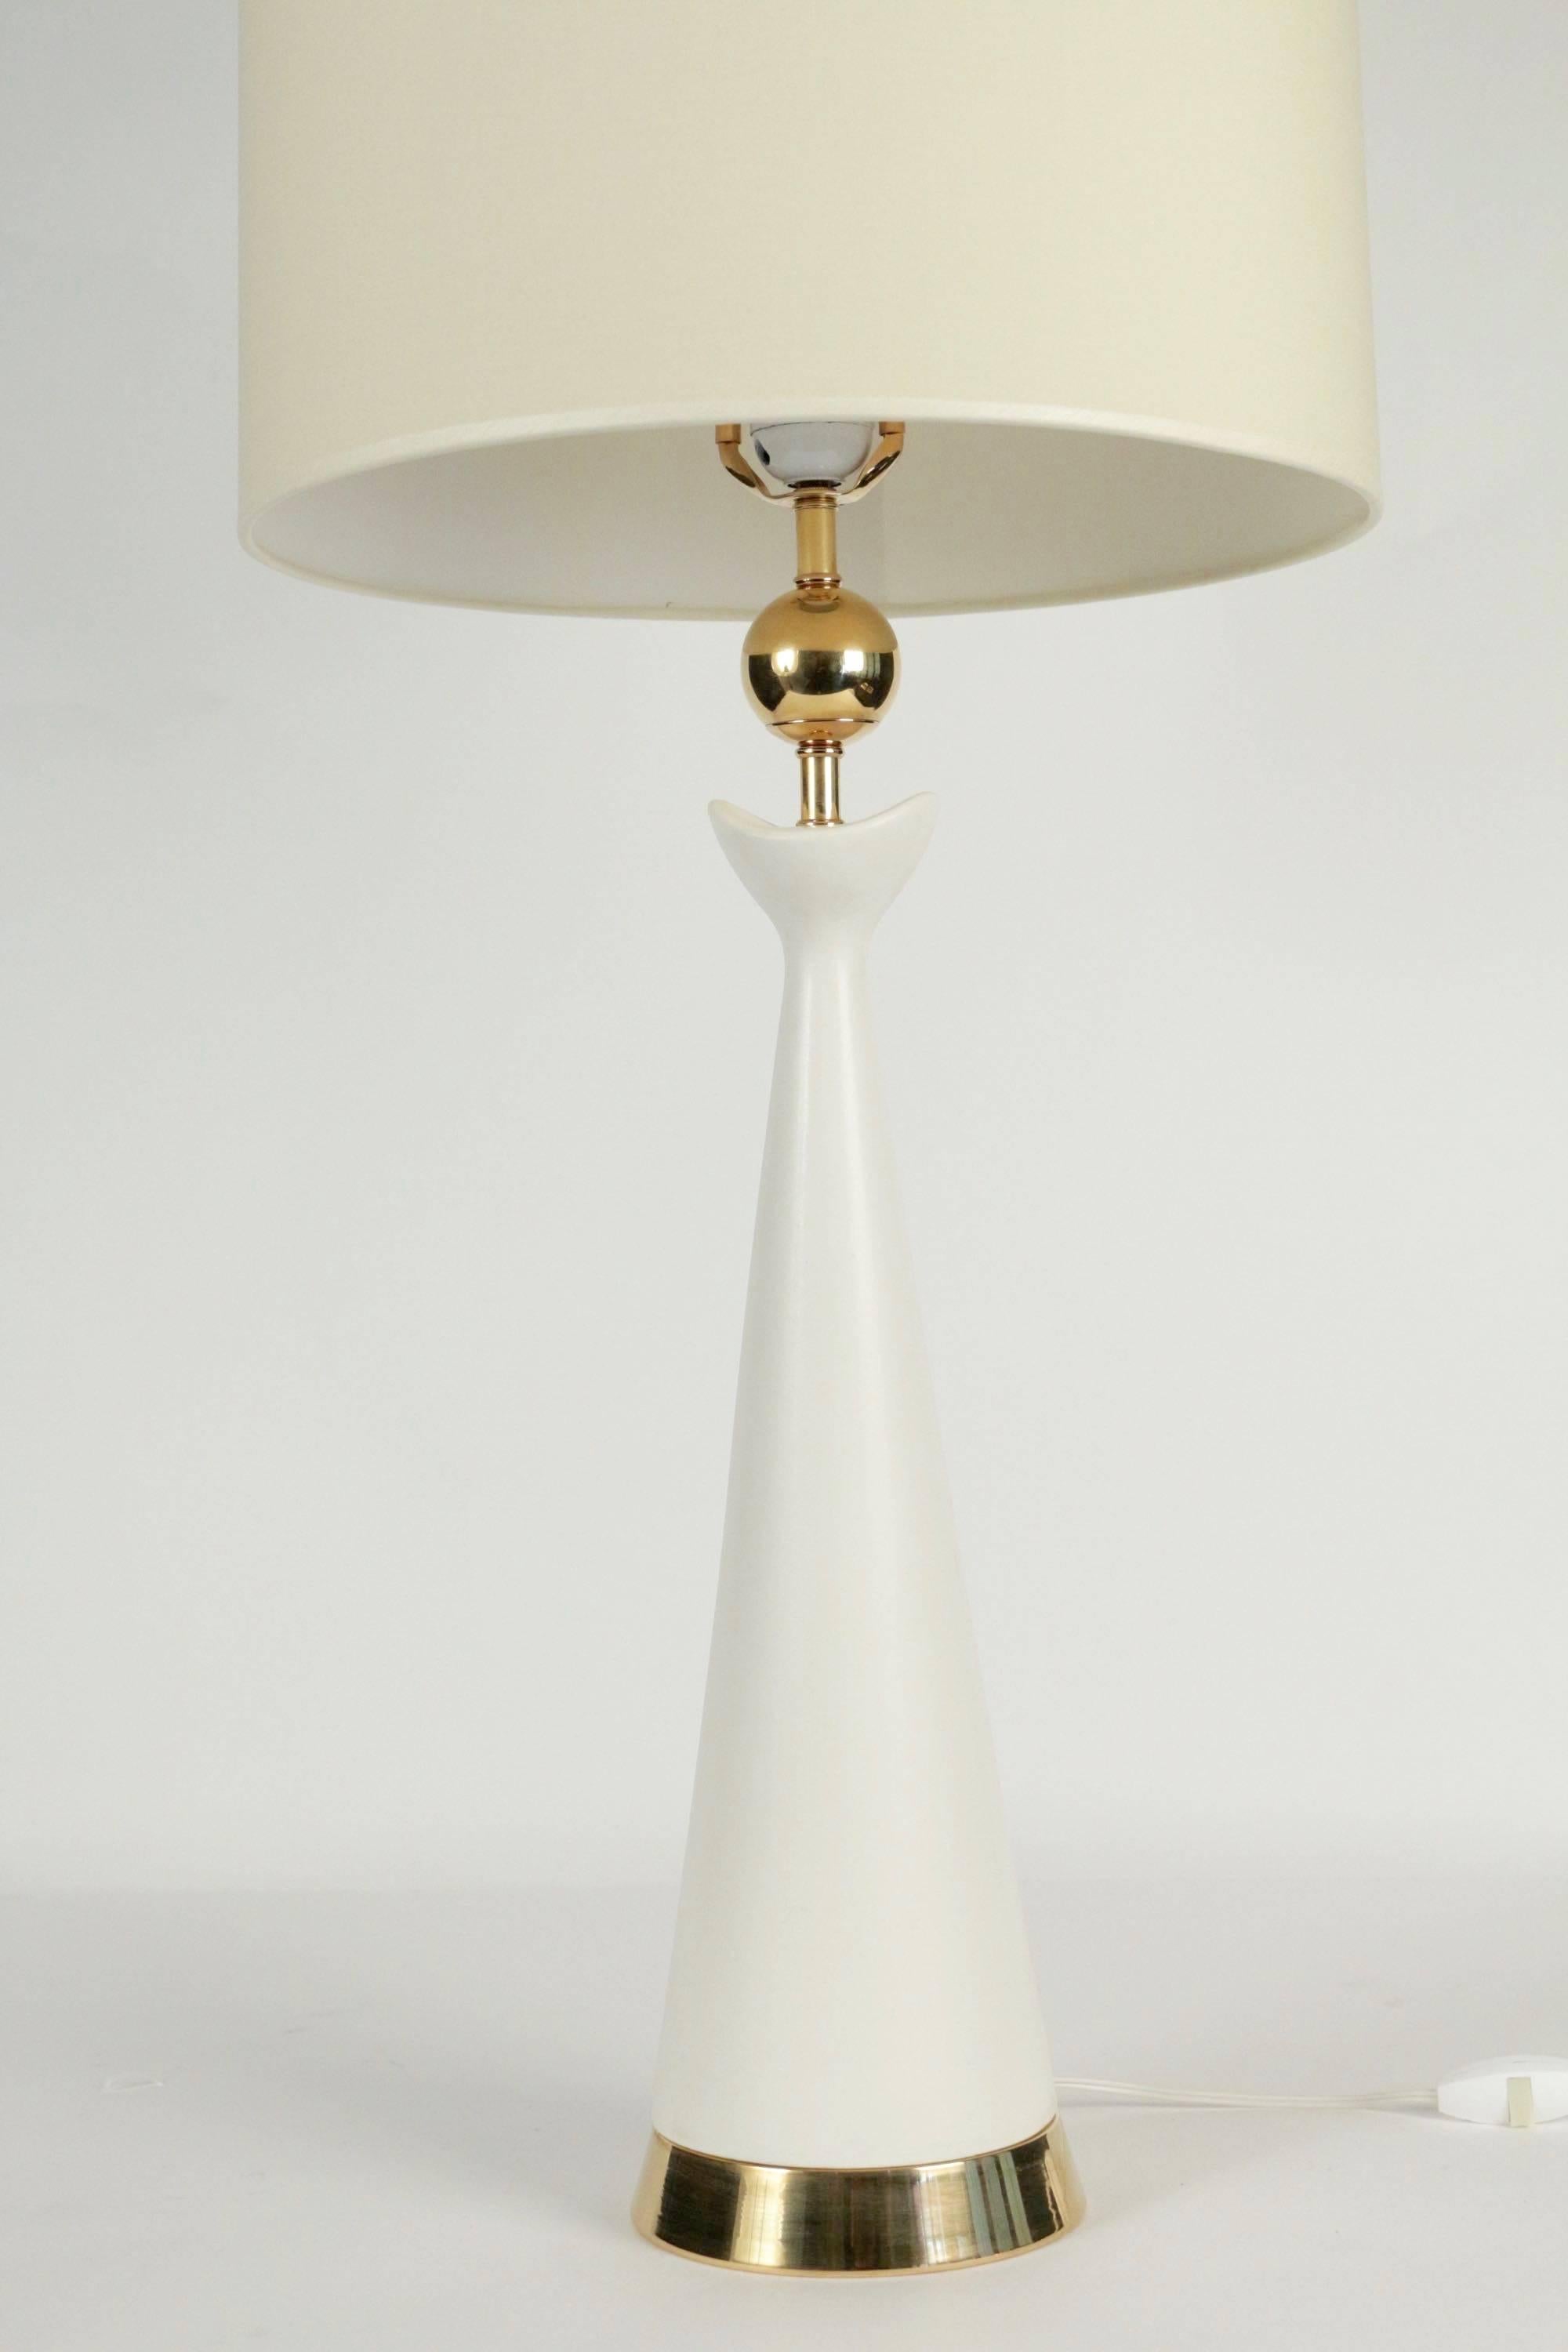 Lamp base made of white enameled ceramic adorned with a brass feet, and at the upper-part with a brass ball. 

Handmade lampshade of off-white cotton. 

One bulb.